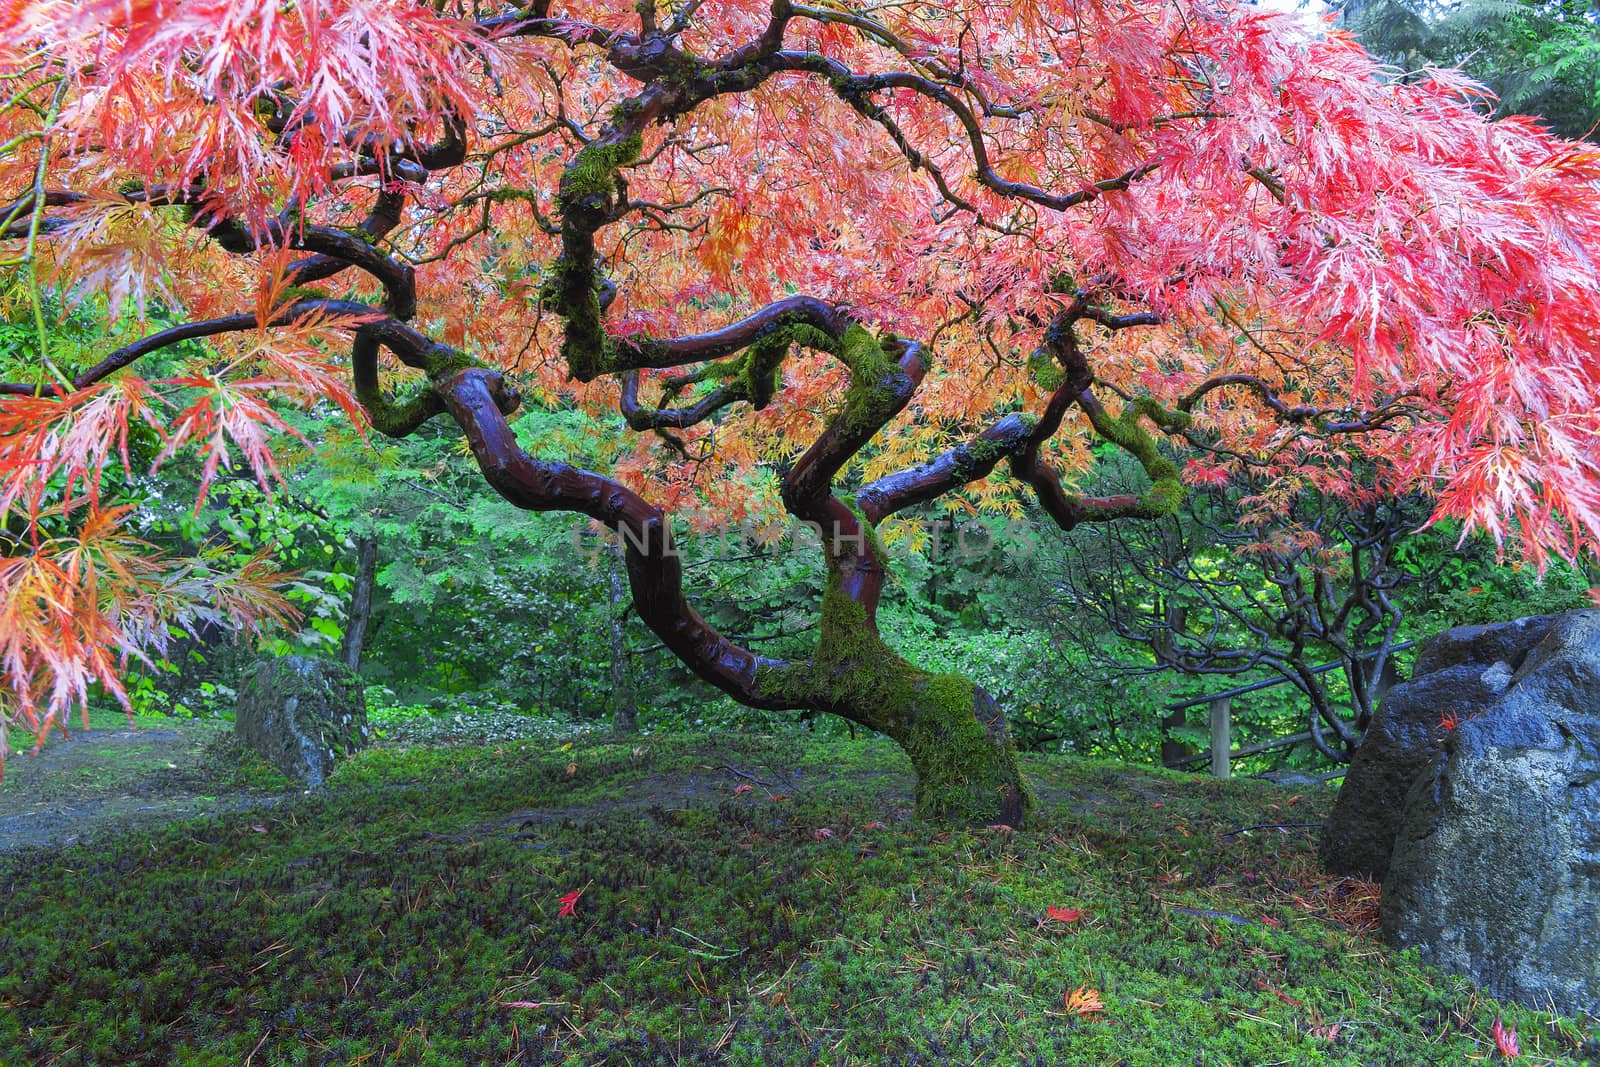 Old Red Lace Leaf Maple Tree at Japanese Garden in Portland Oregon during Autumn